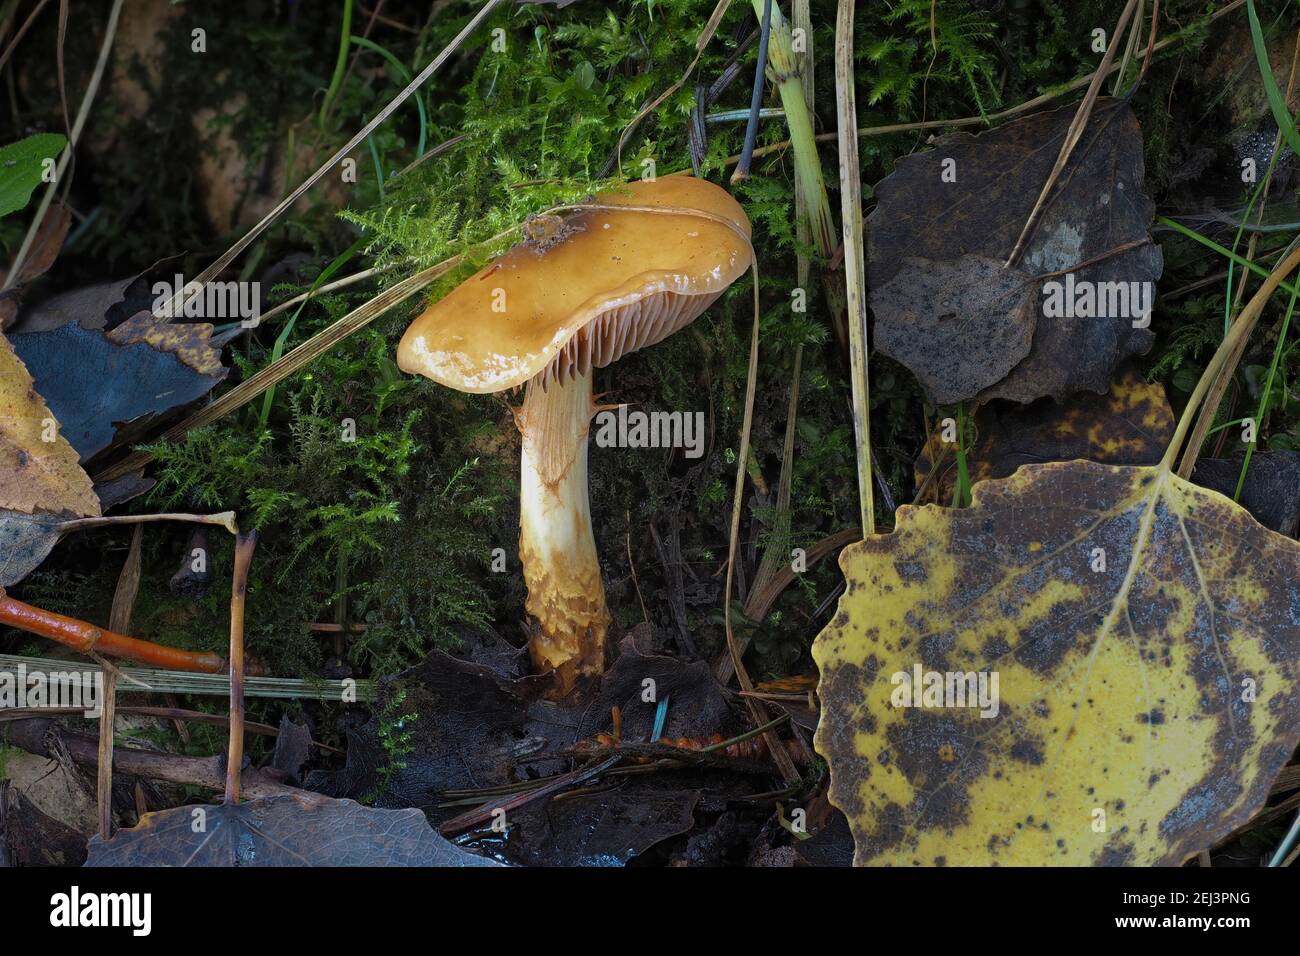 The Girdled Webcap (Cortinarius trivialis) is an poisonous mushroom , an intresting photo Stock Photo